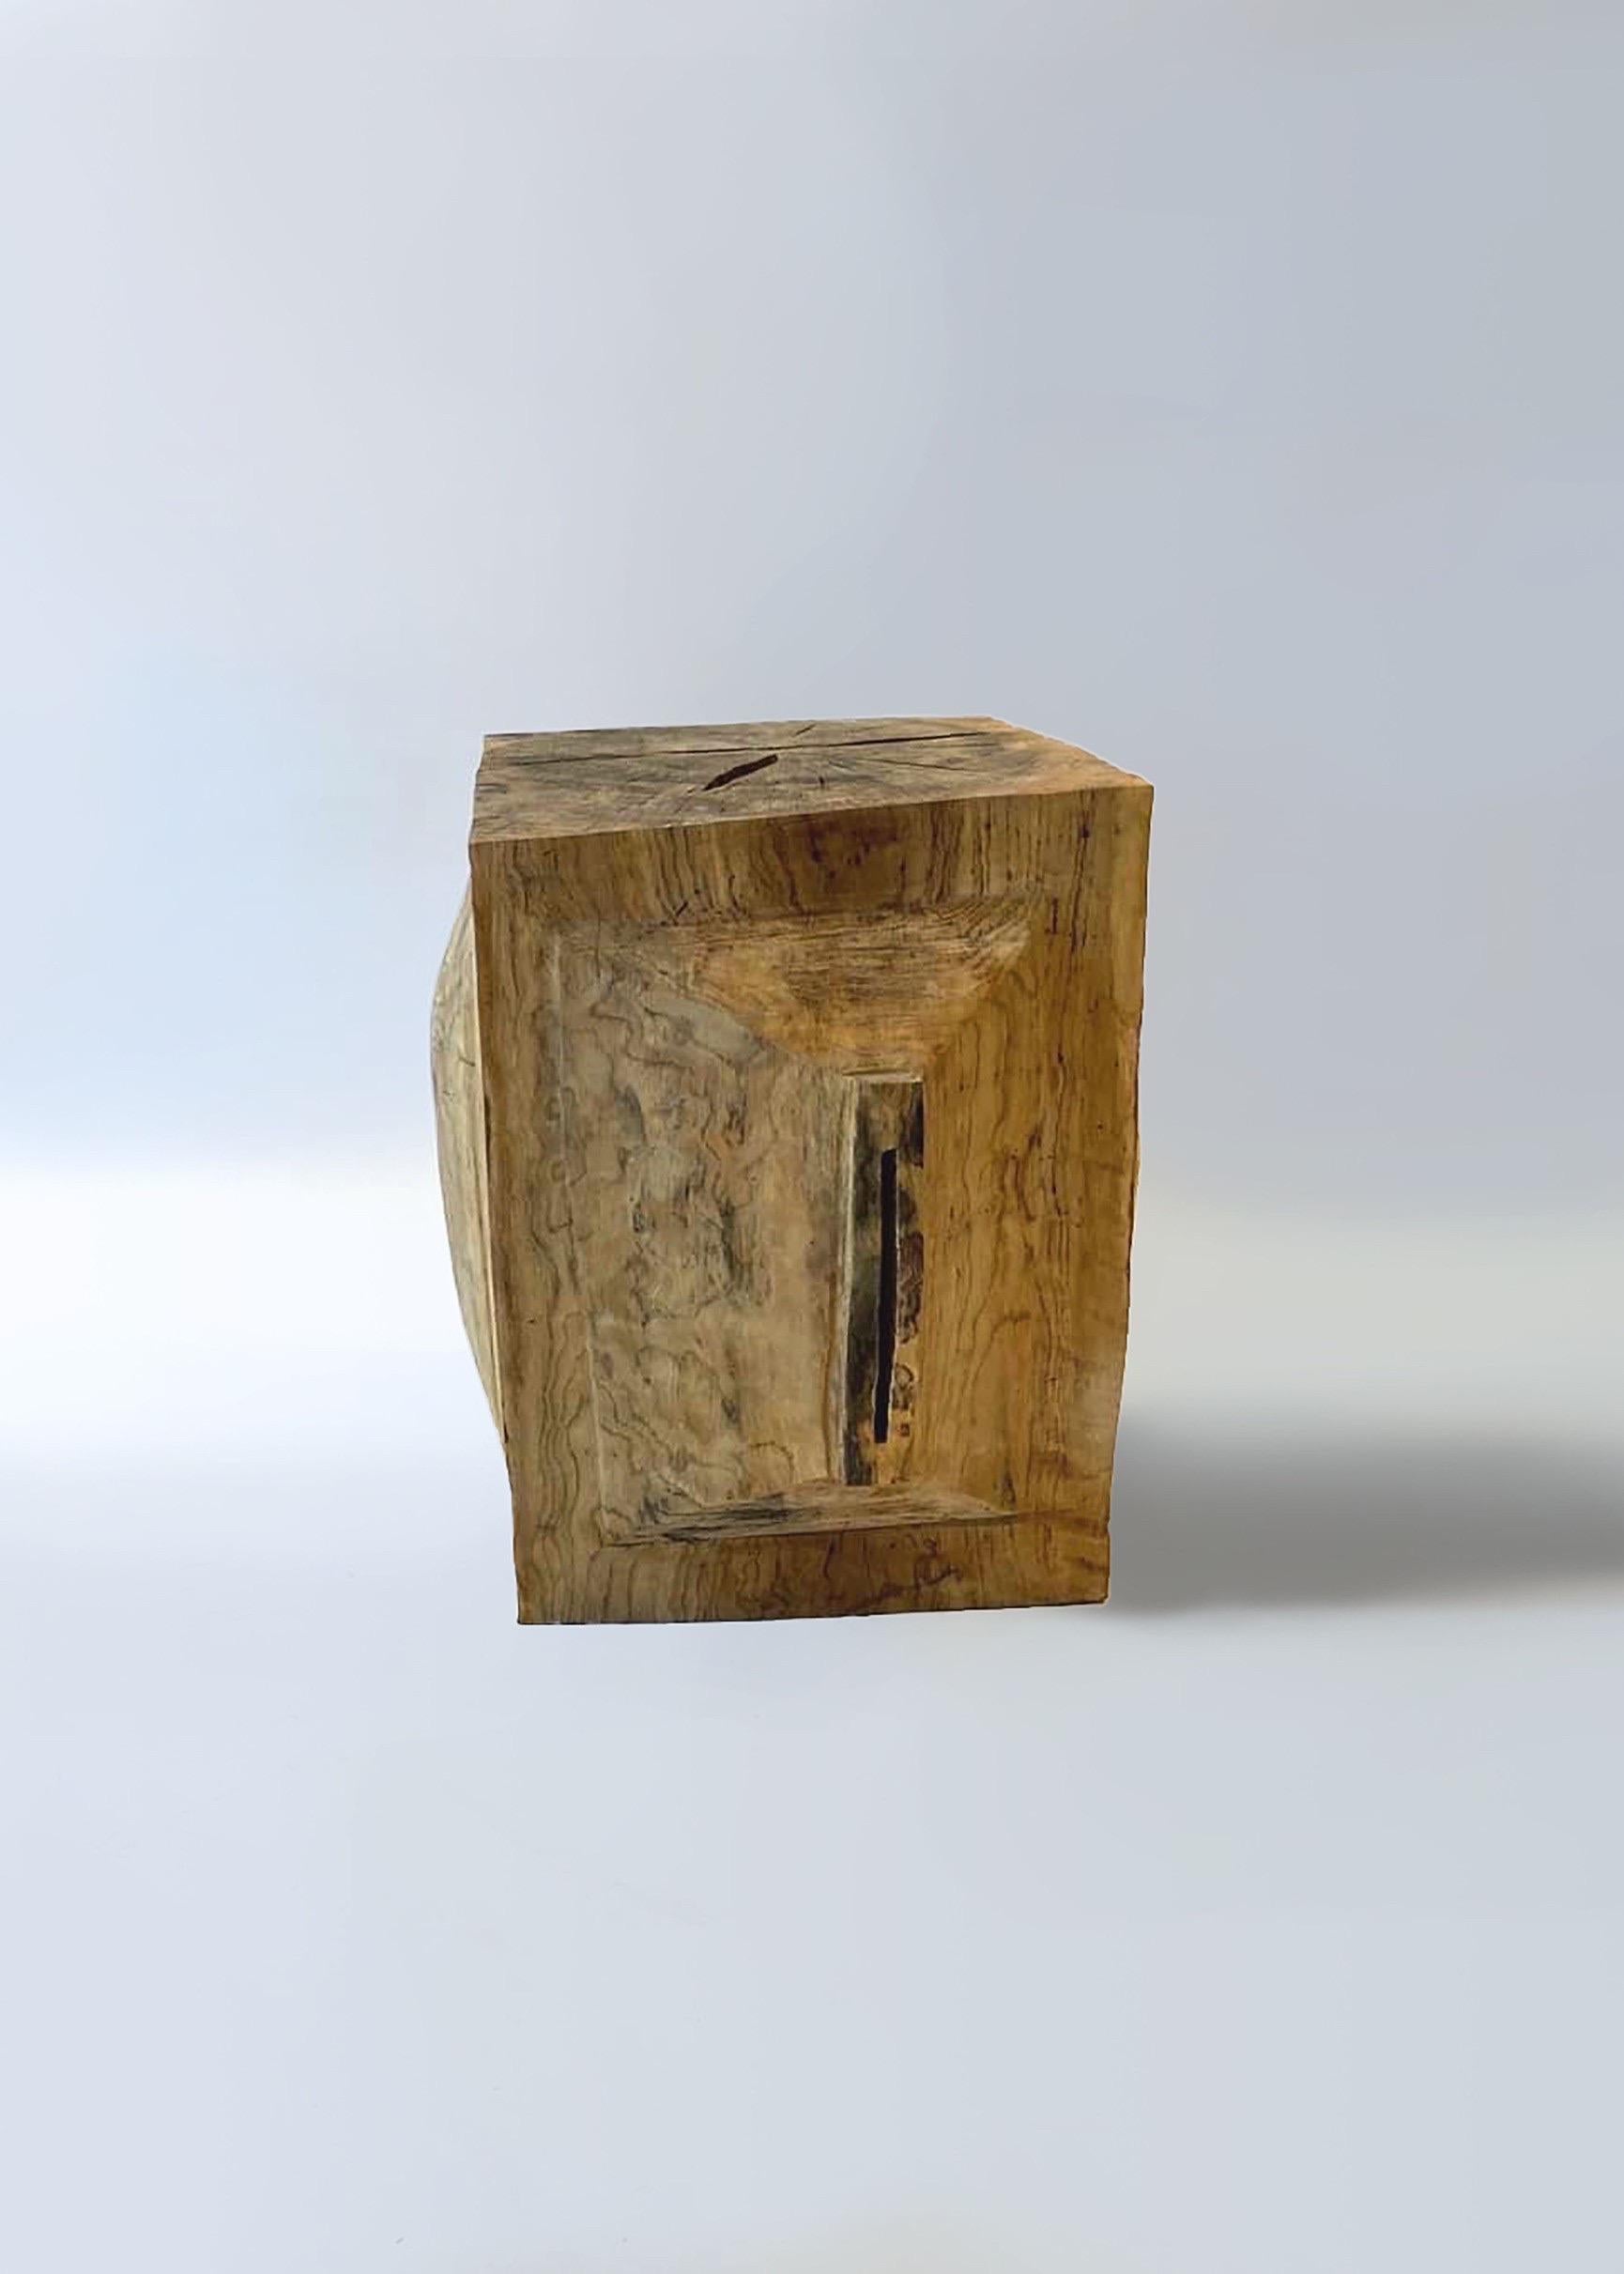 Name: Robot
Sculptural stool by Zogei carved furniture
Material: Quercus serrata
This work is carved from log with some kinds of chainsaws.
Most of wood used for Nishimura's works are unable to use anything, these woods are unsuitable material